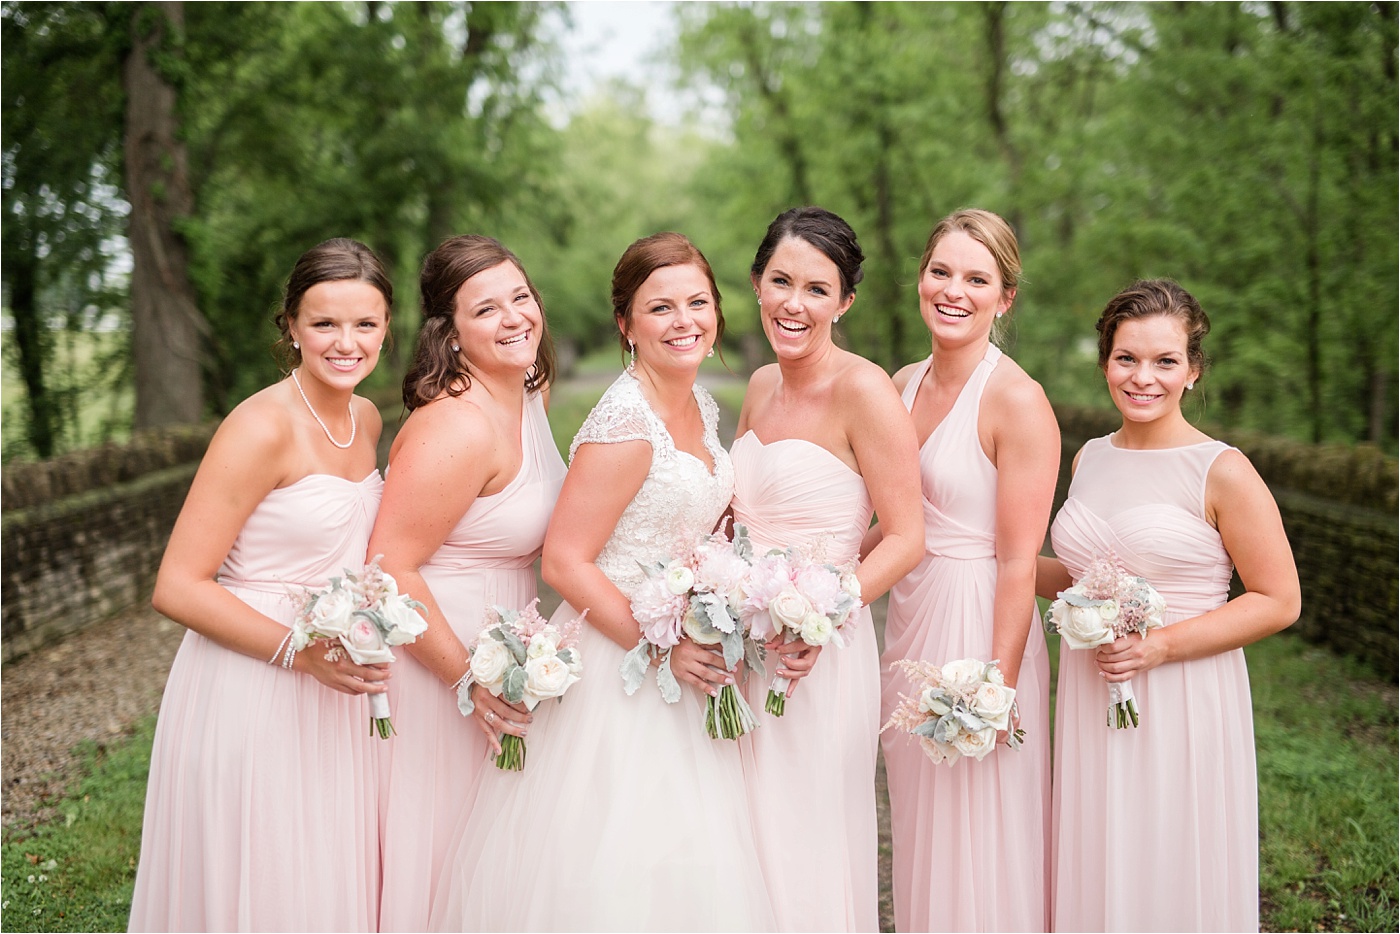 A Blush Outdoor wedding at Irongate Equestrian | KariMe Photography_0118